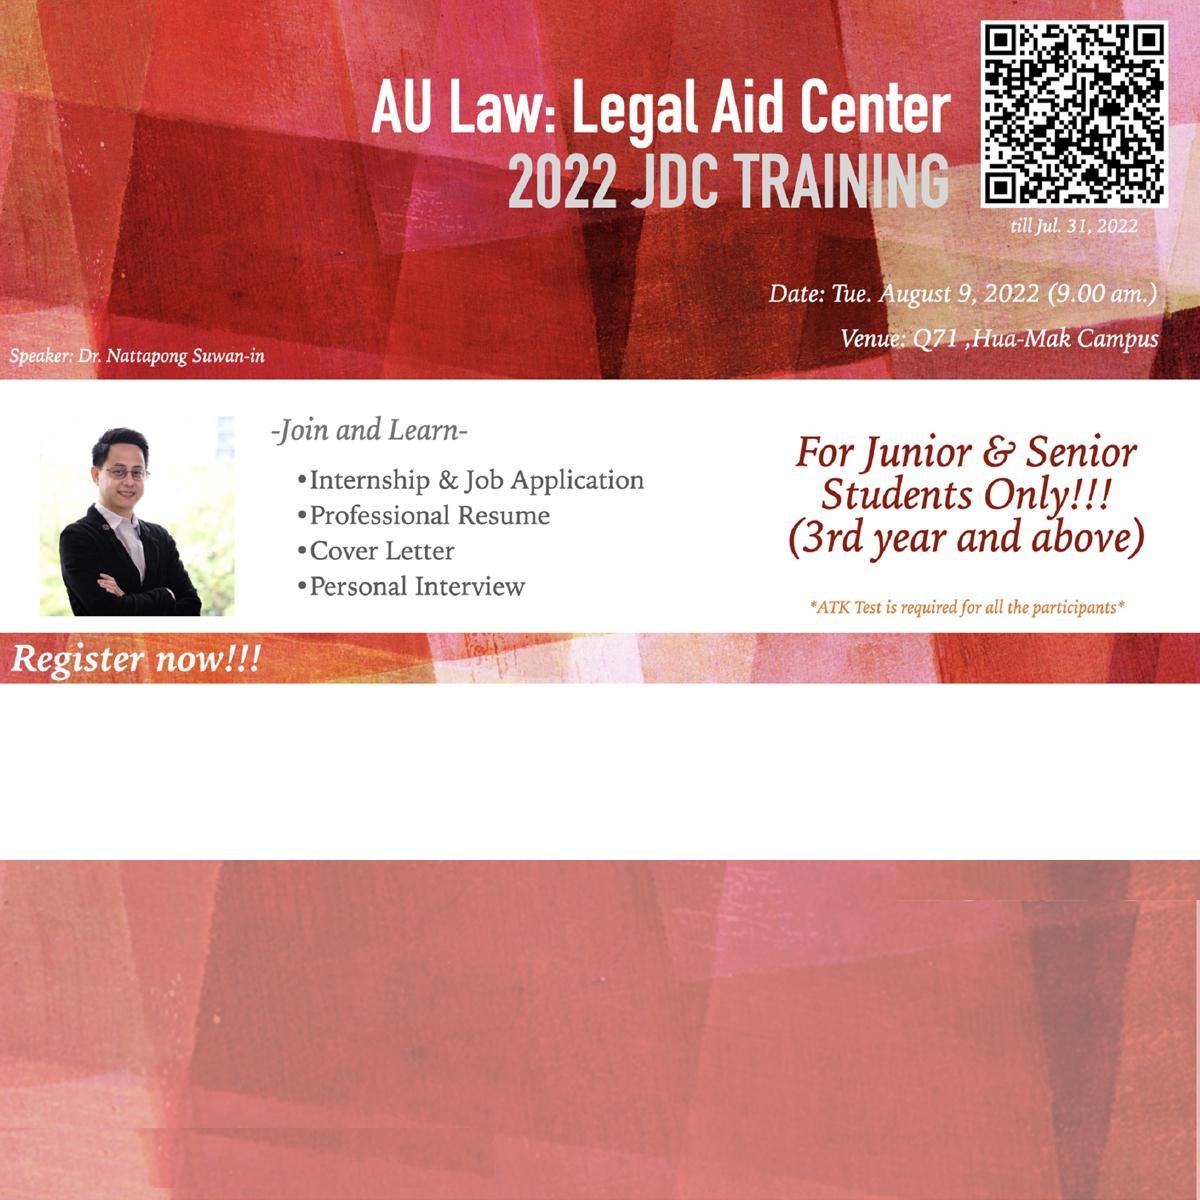 The 2022 JDC Training, hosted by AU Law: Legal Aid Center